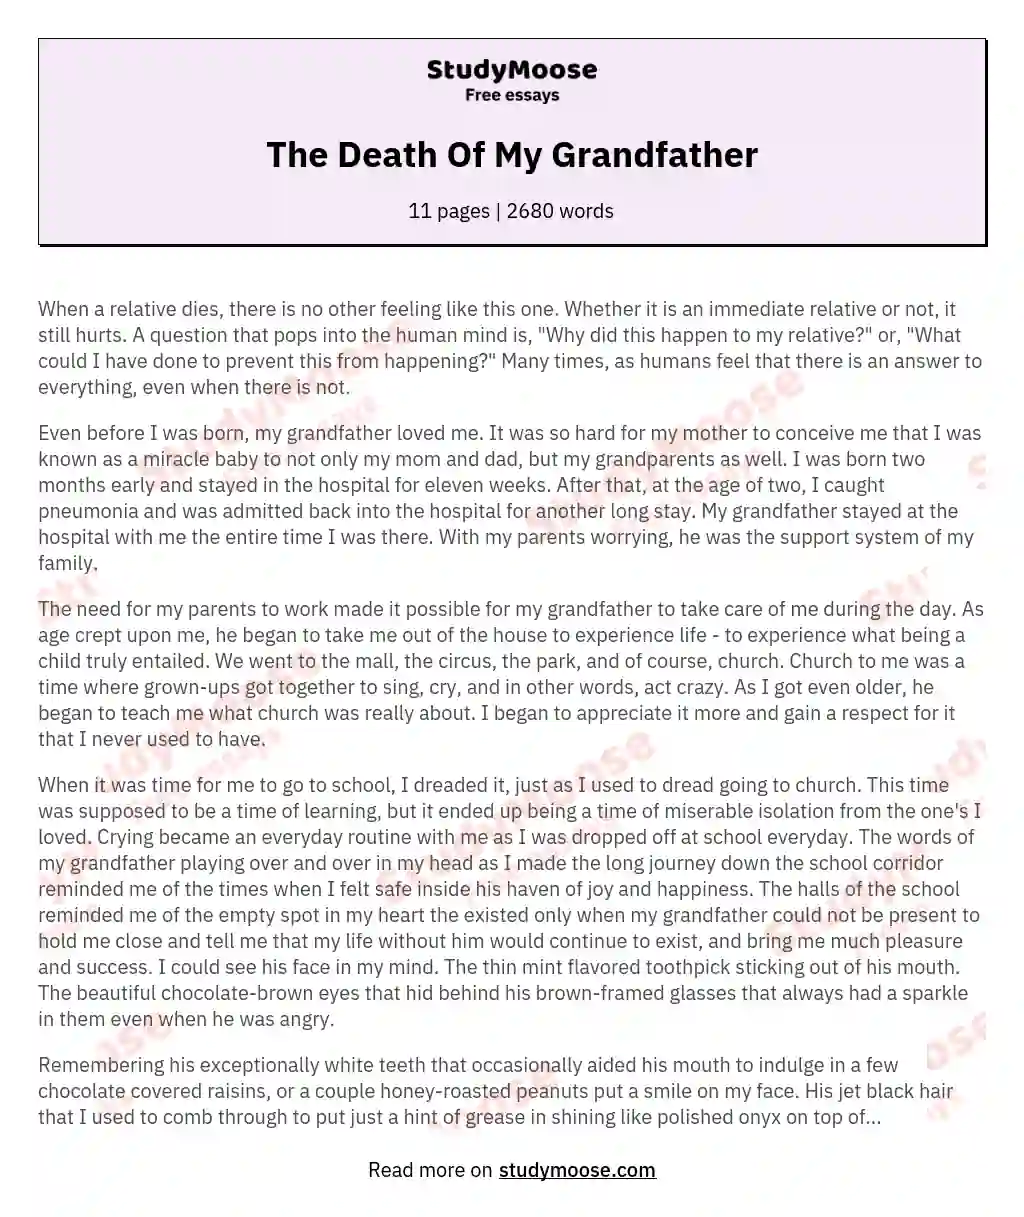 The Death Of My Grandfather